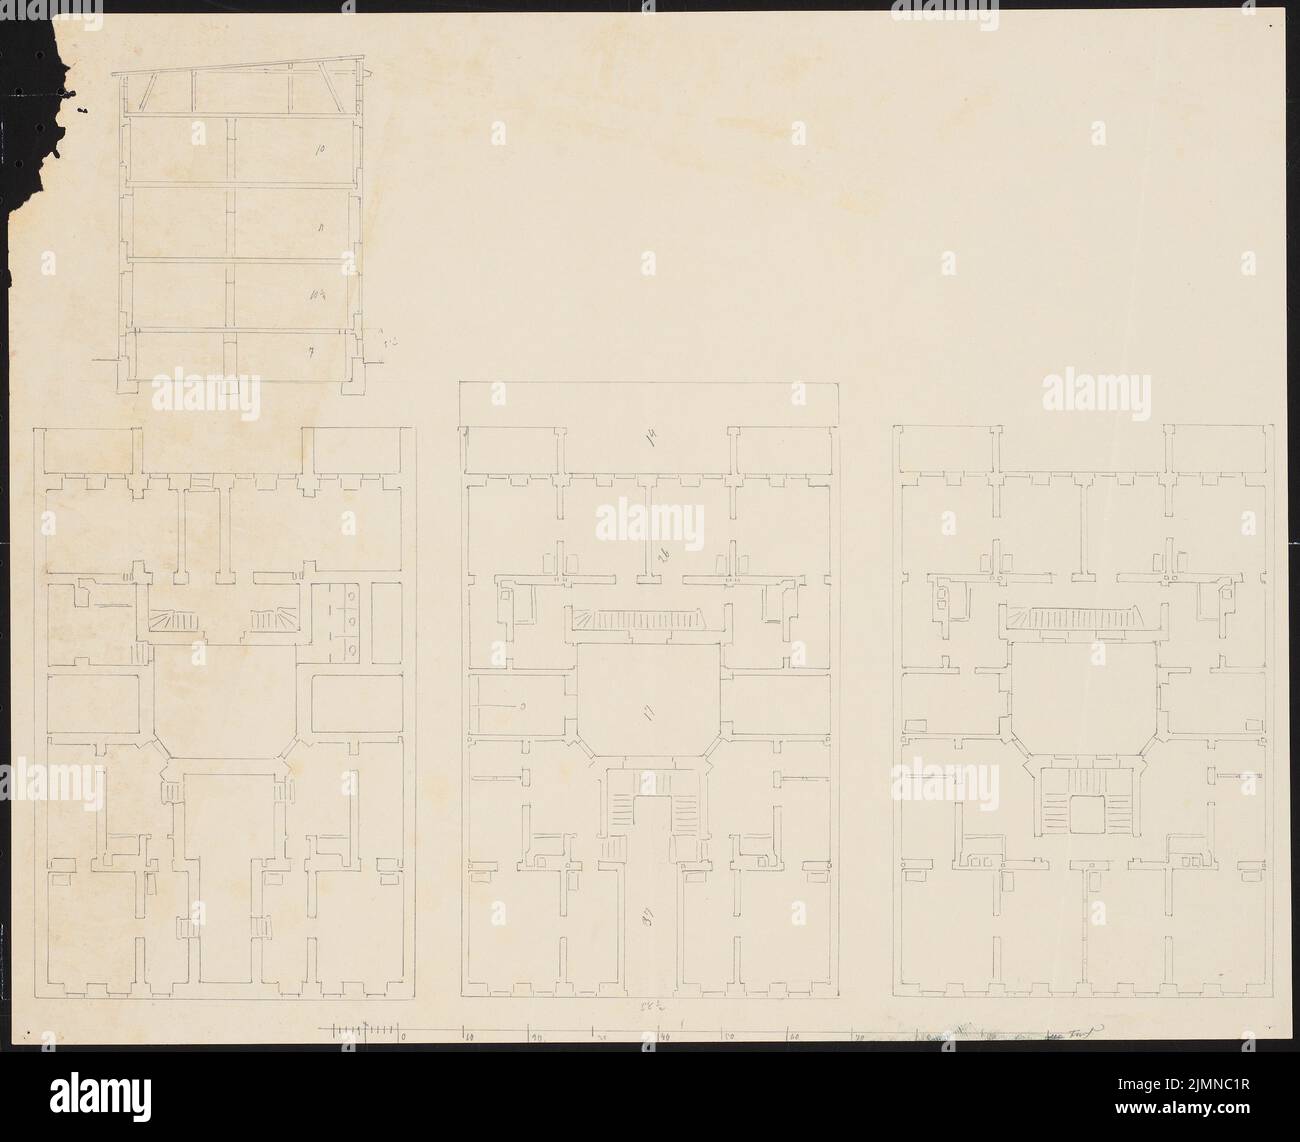 Knoblauch Eduard (1801-1865), three-storey rental house around the octagonal farm (without dat.): Floor plan basement, ground and upper floor, cut. Pencil, 34.9 x 43.1 cm (including scan edges) Stock Photo